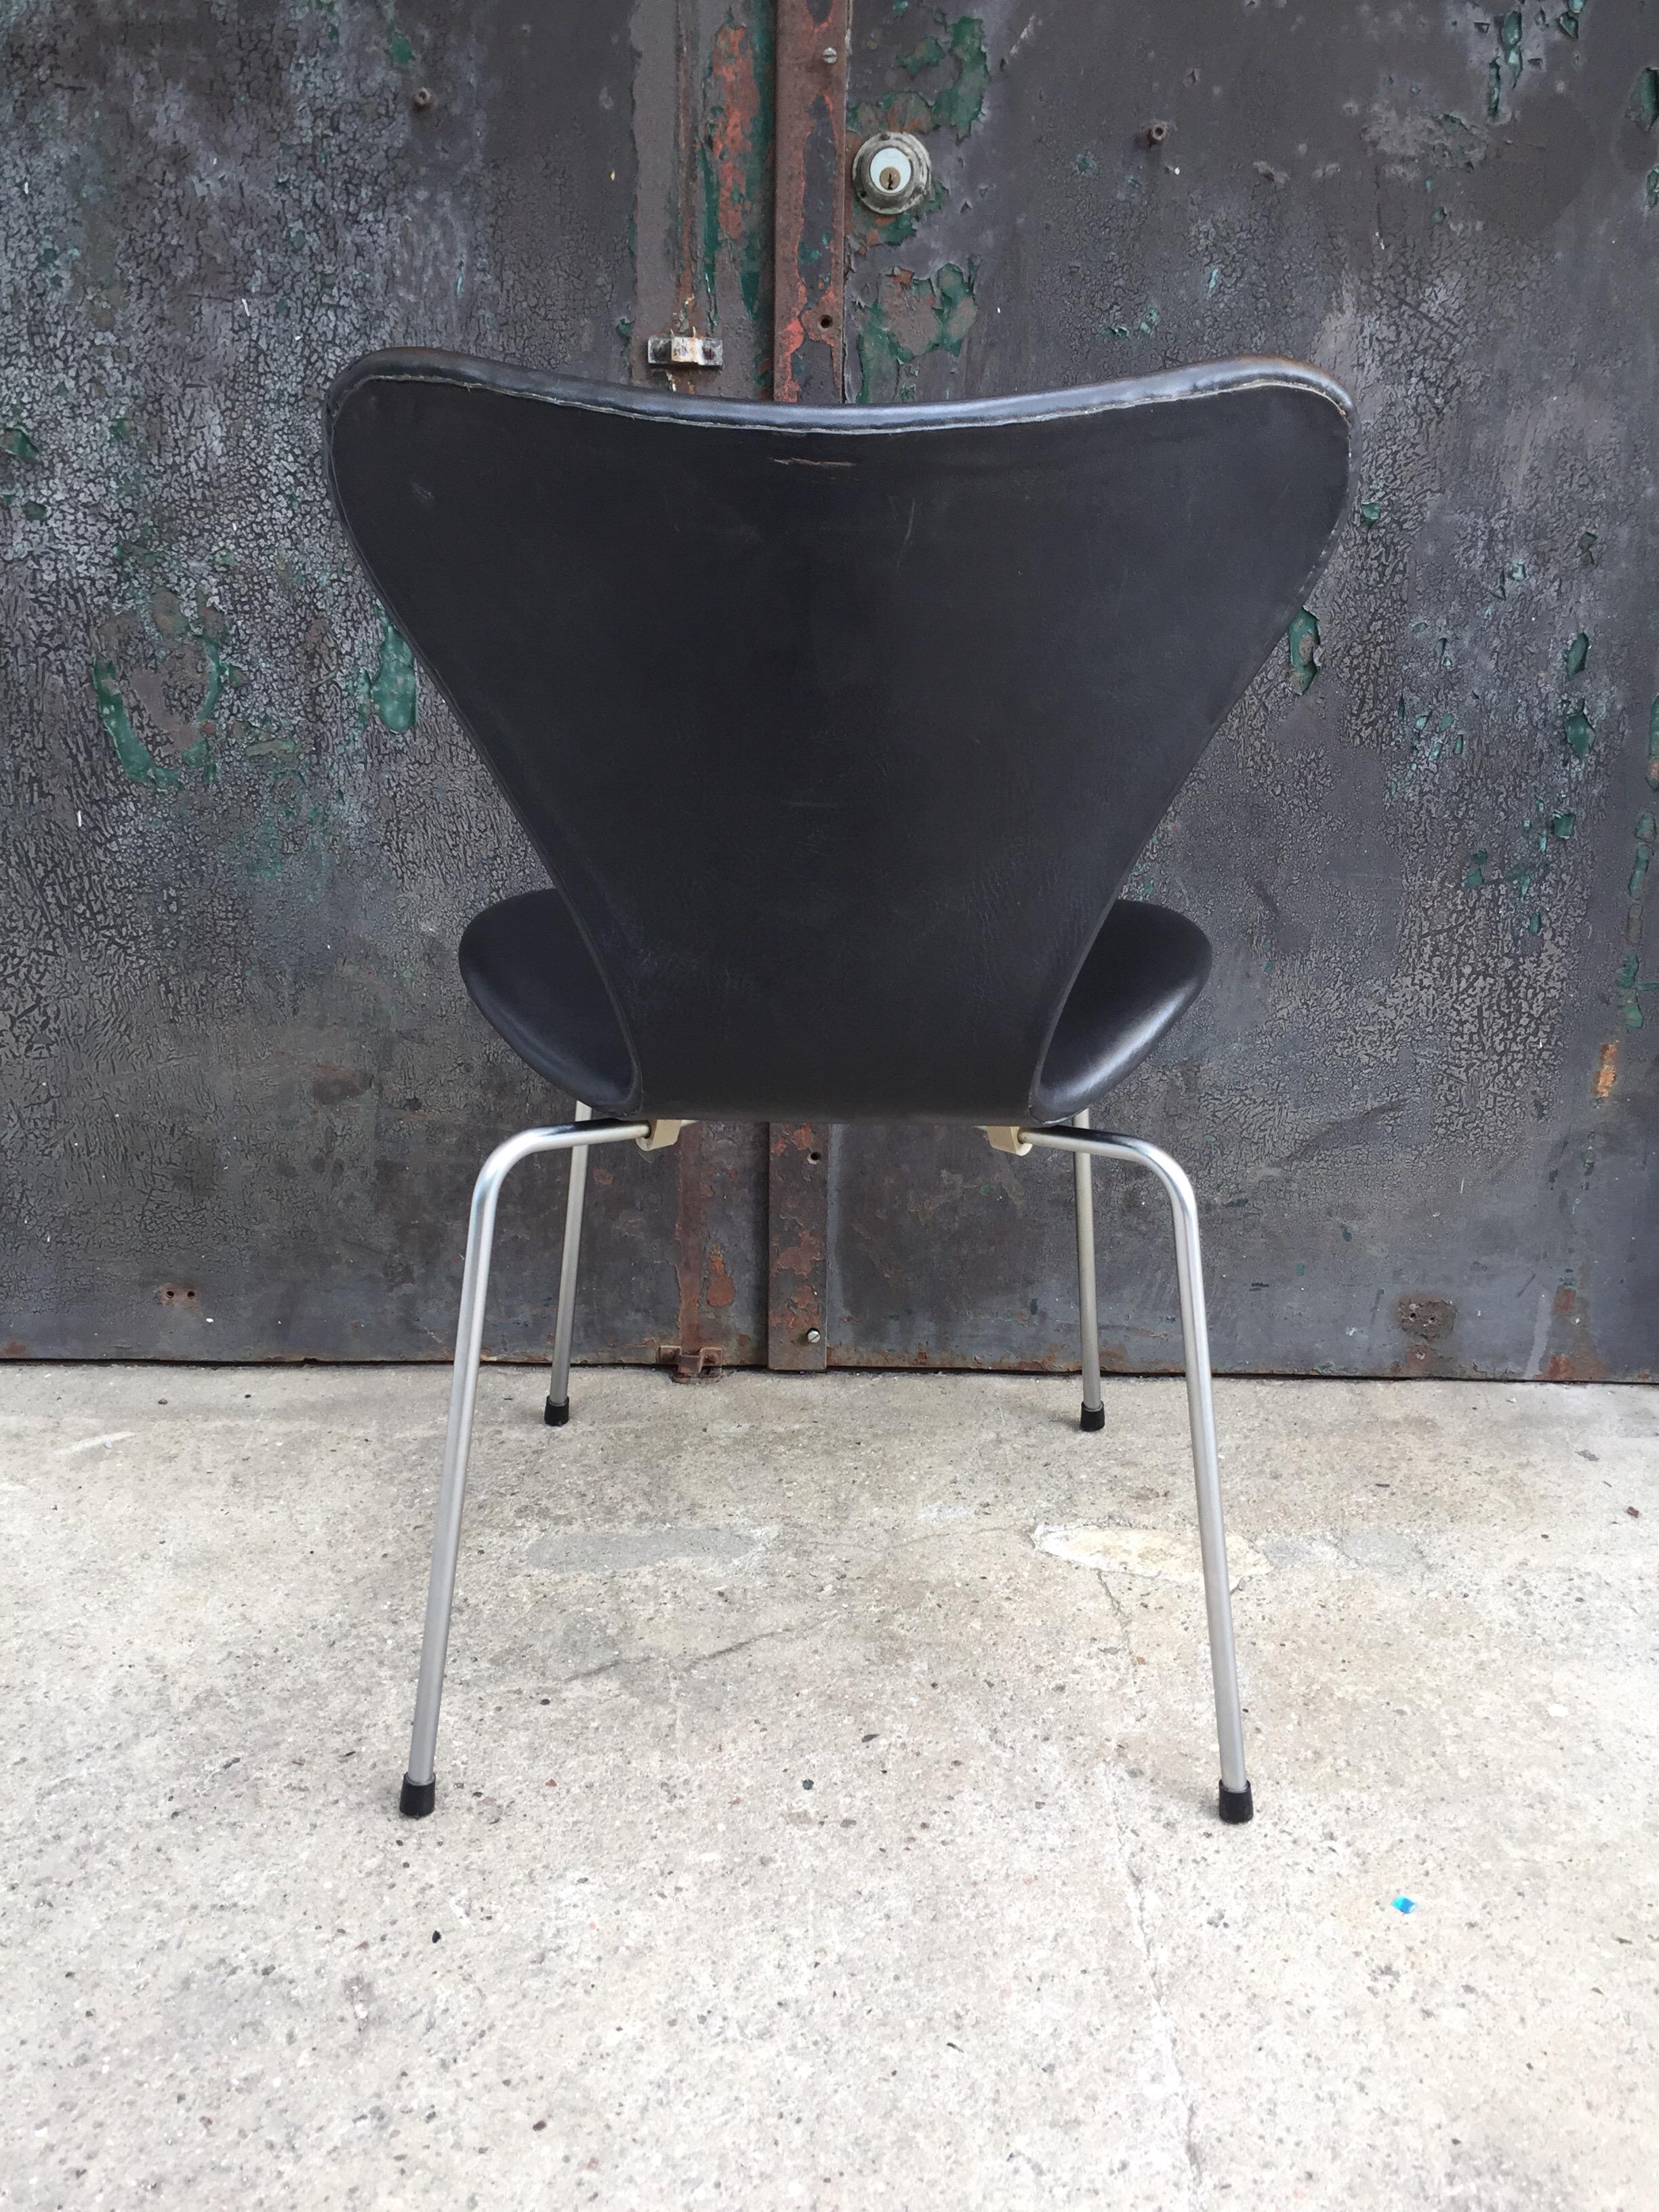 Mid-20th Century Arne Jacobsen 3107 Chair Designed in 1955 in Original Black Leather